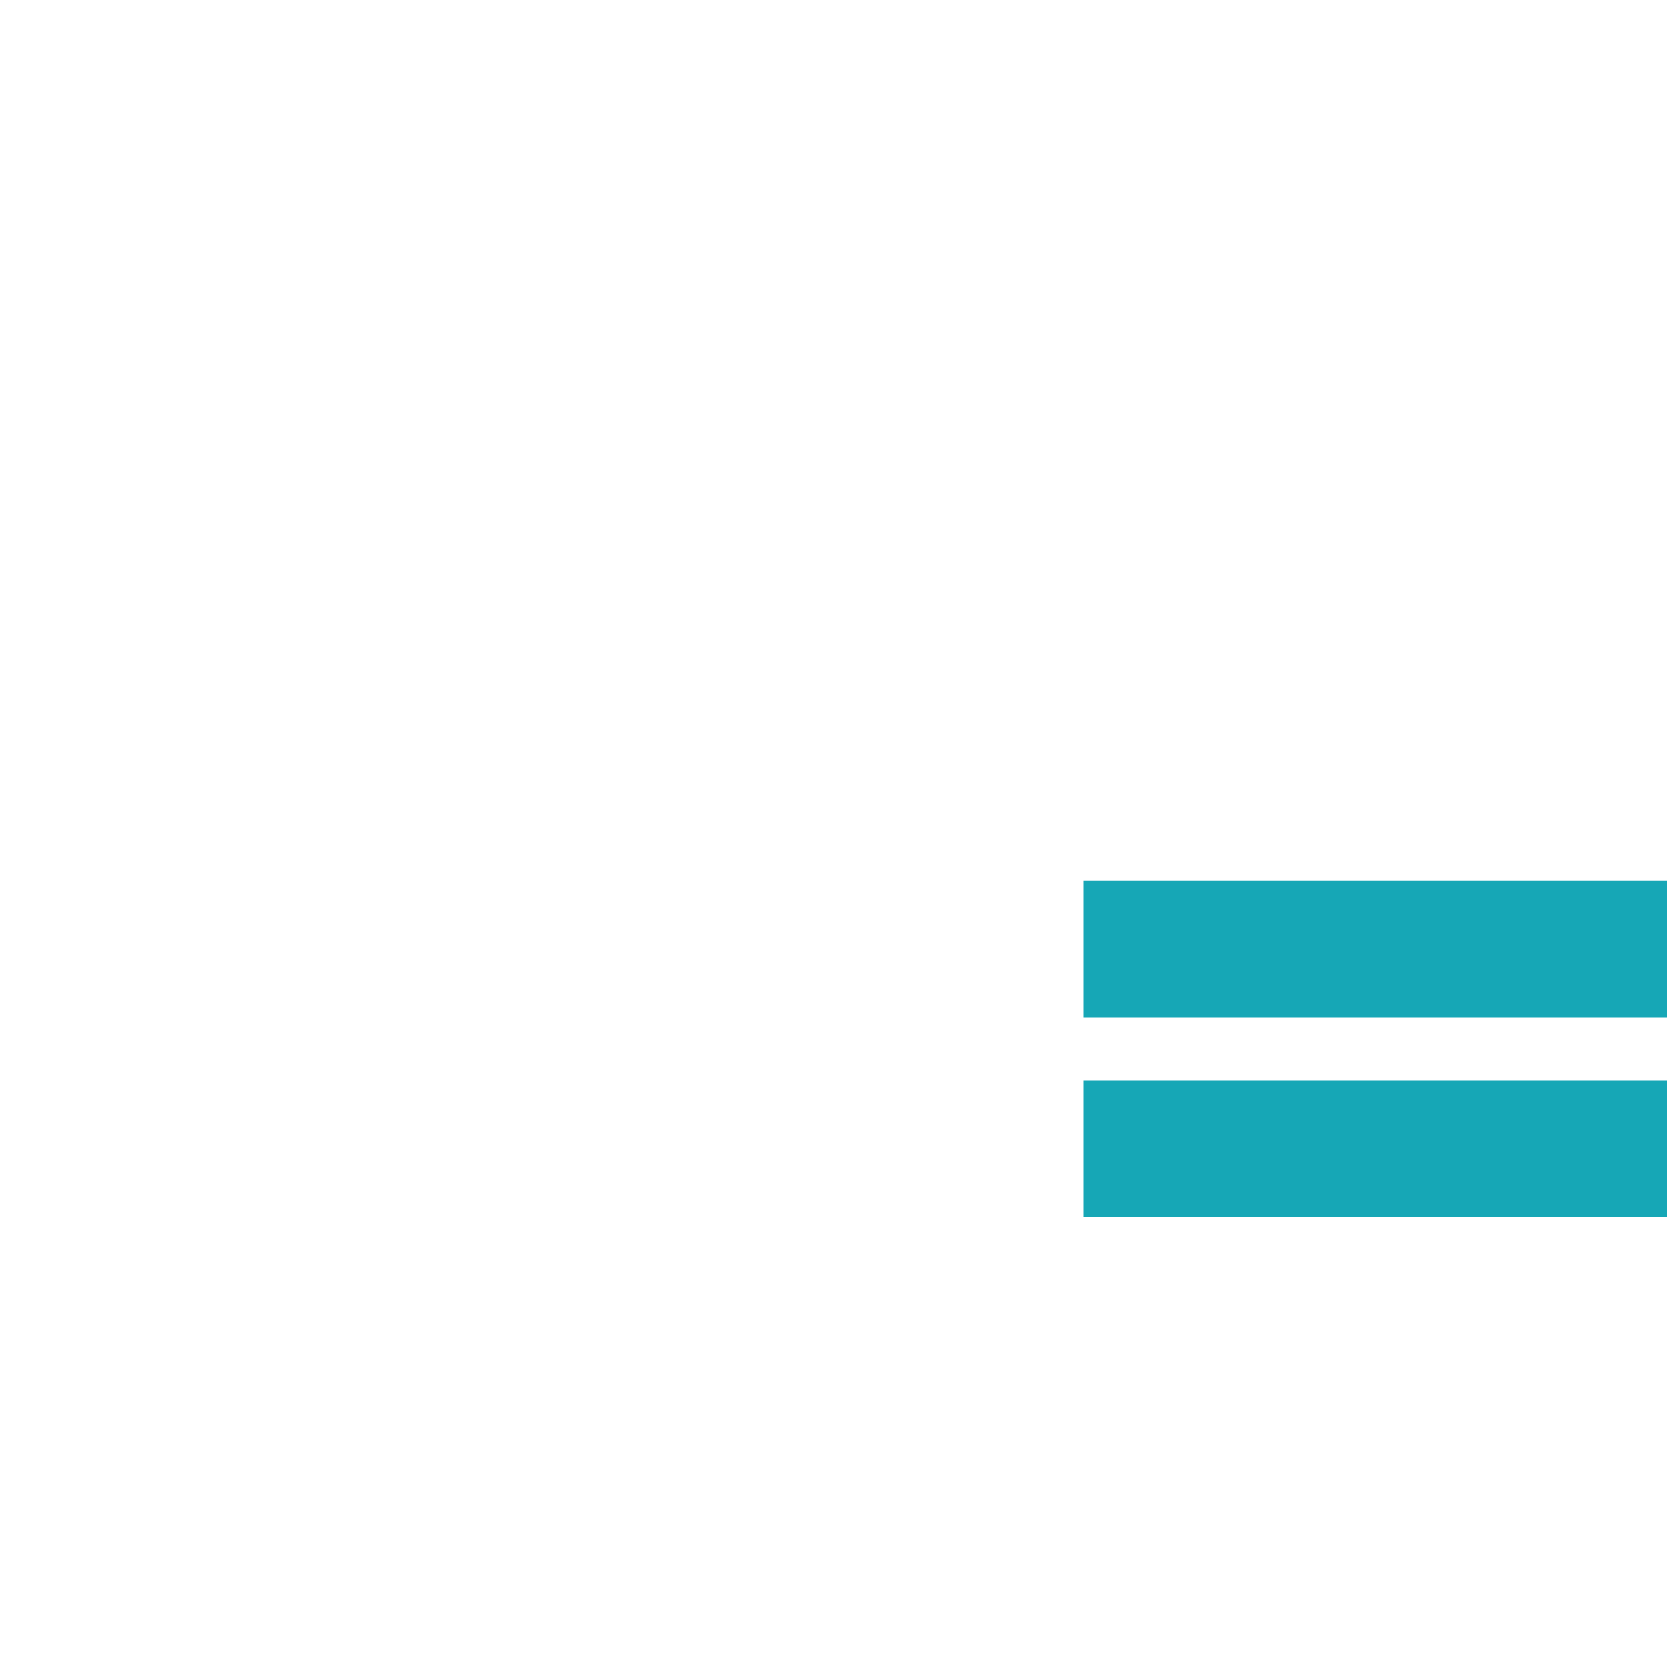 Inland Rail Image Library